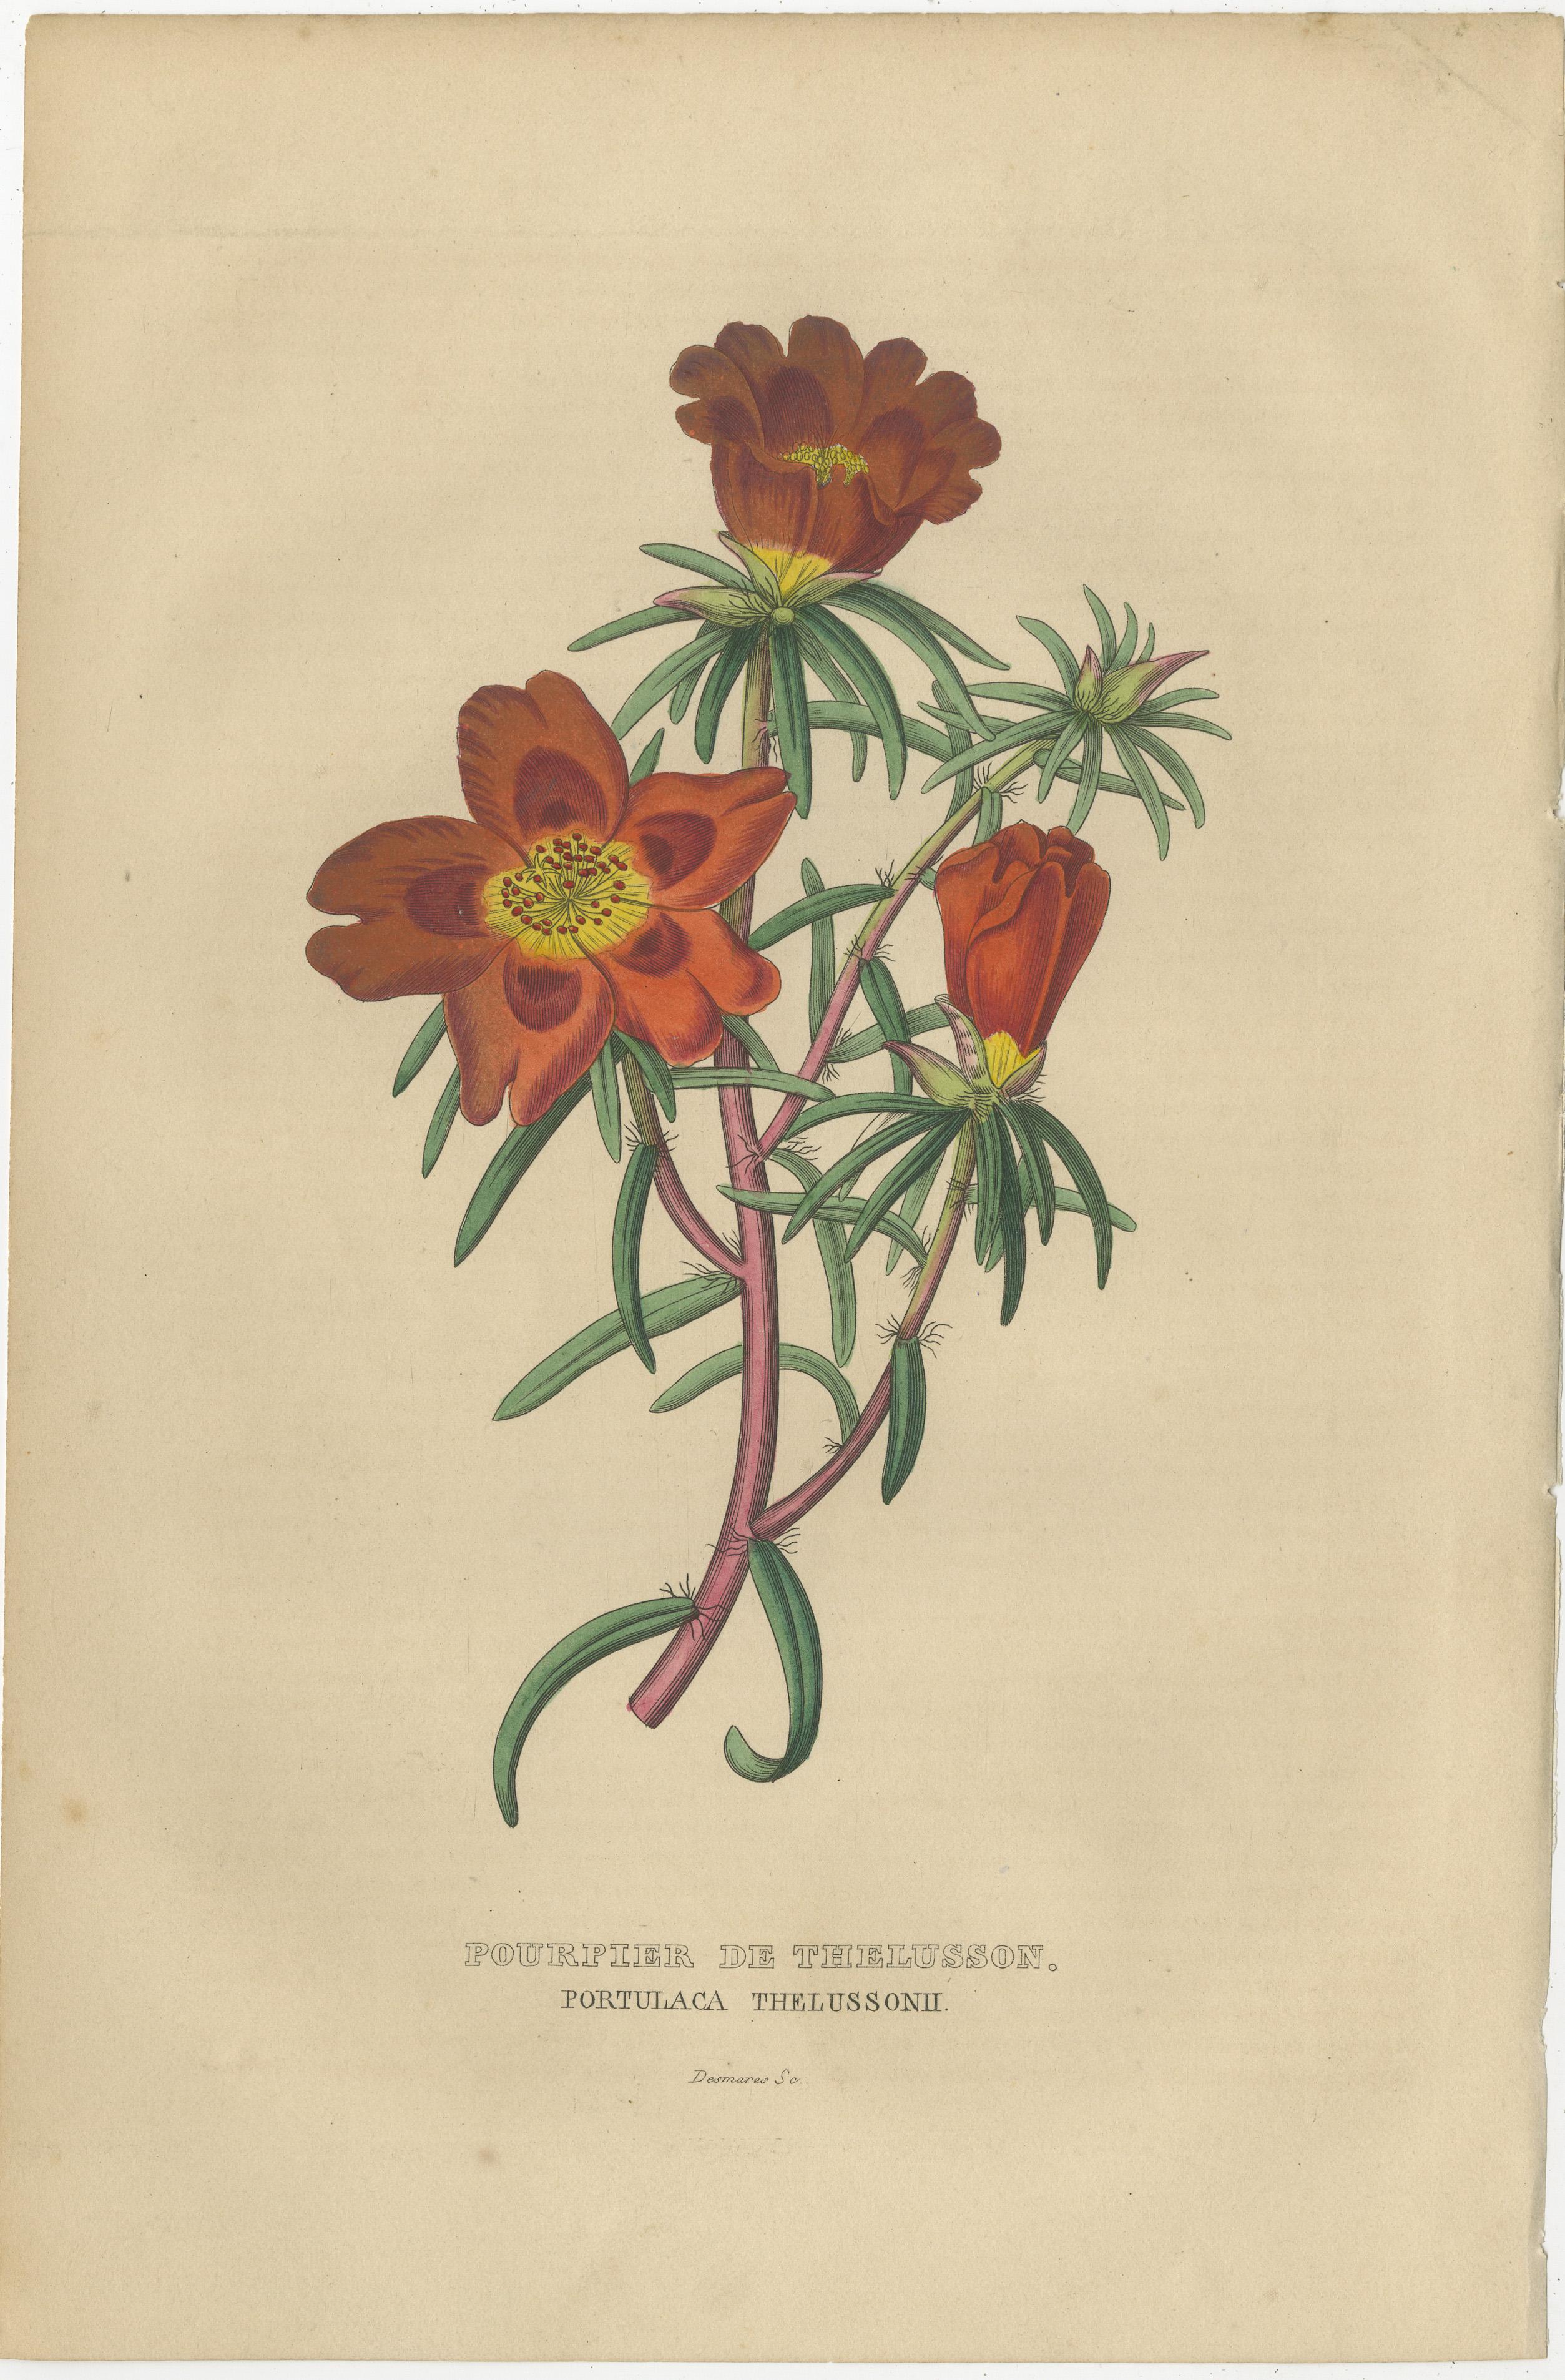 The engravings presented here are exquisite botanical illustrations from the 'Dictionnaire Classique des Sciences Naturelles', an authoritative work published in Brussels in 1845 under the editorship of the Belgian naturalist Pierre Auguste Joseph